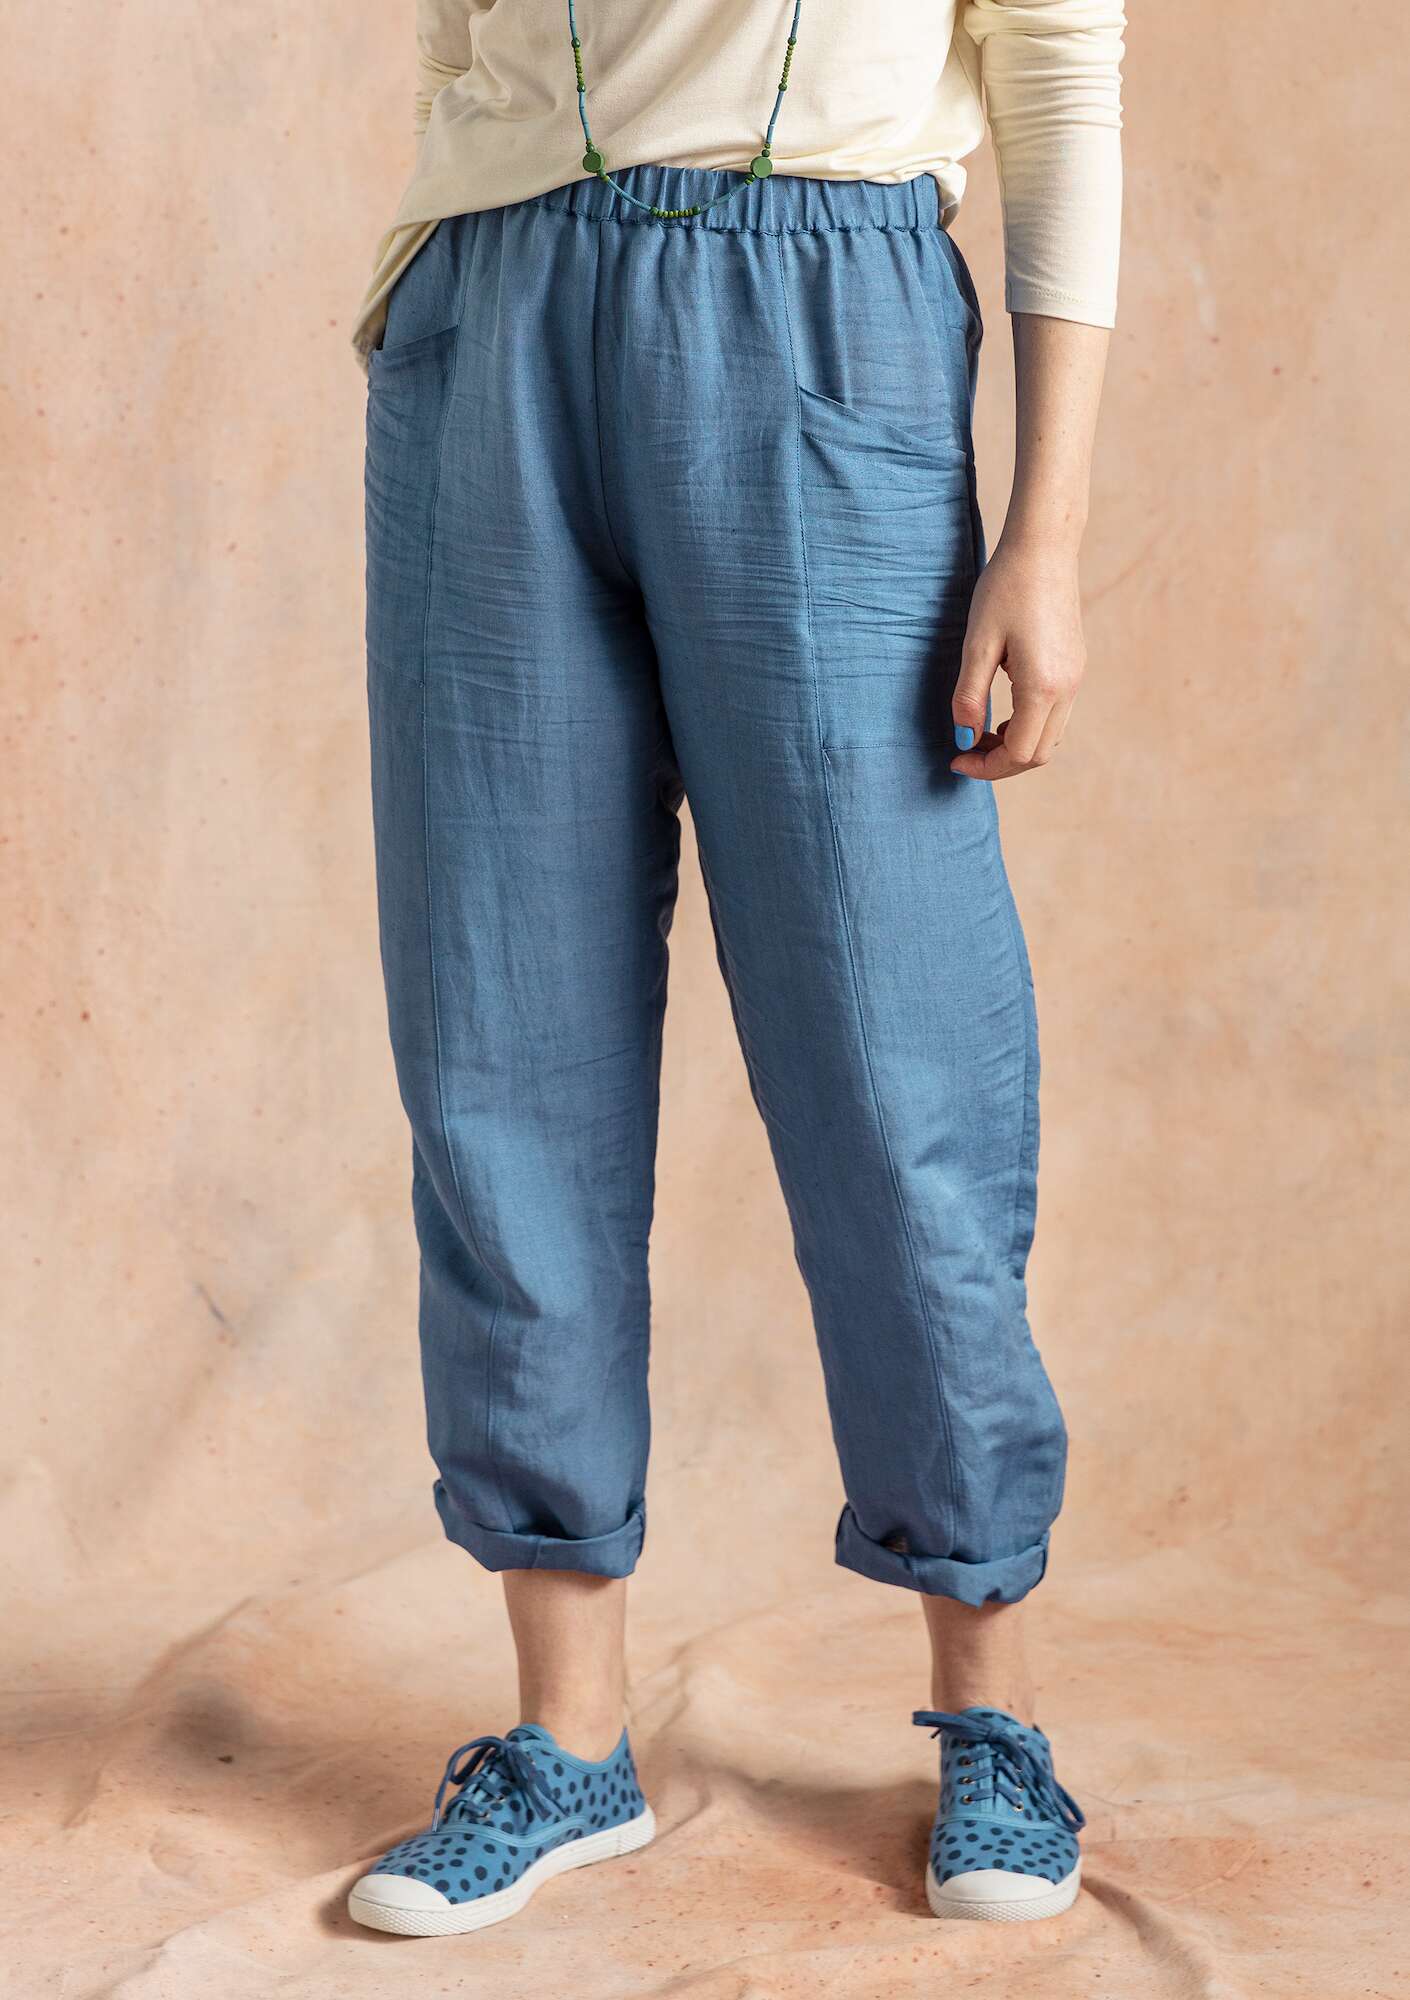 Solid-colored pants flax blue